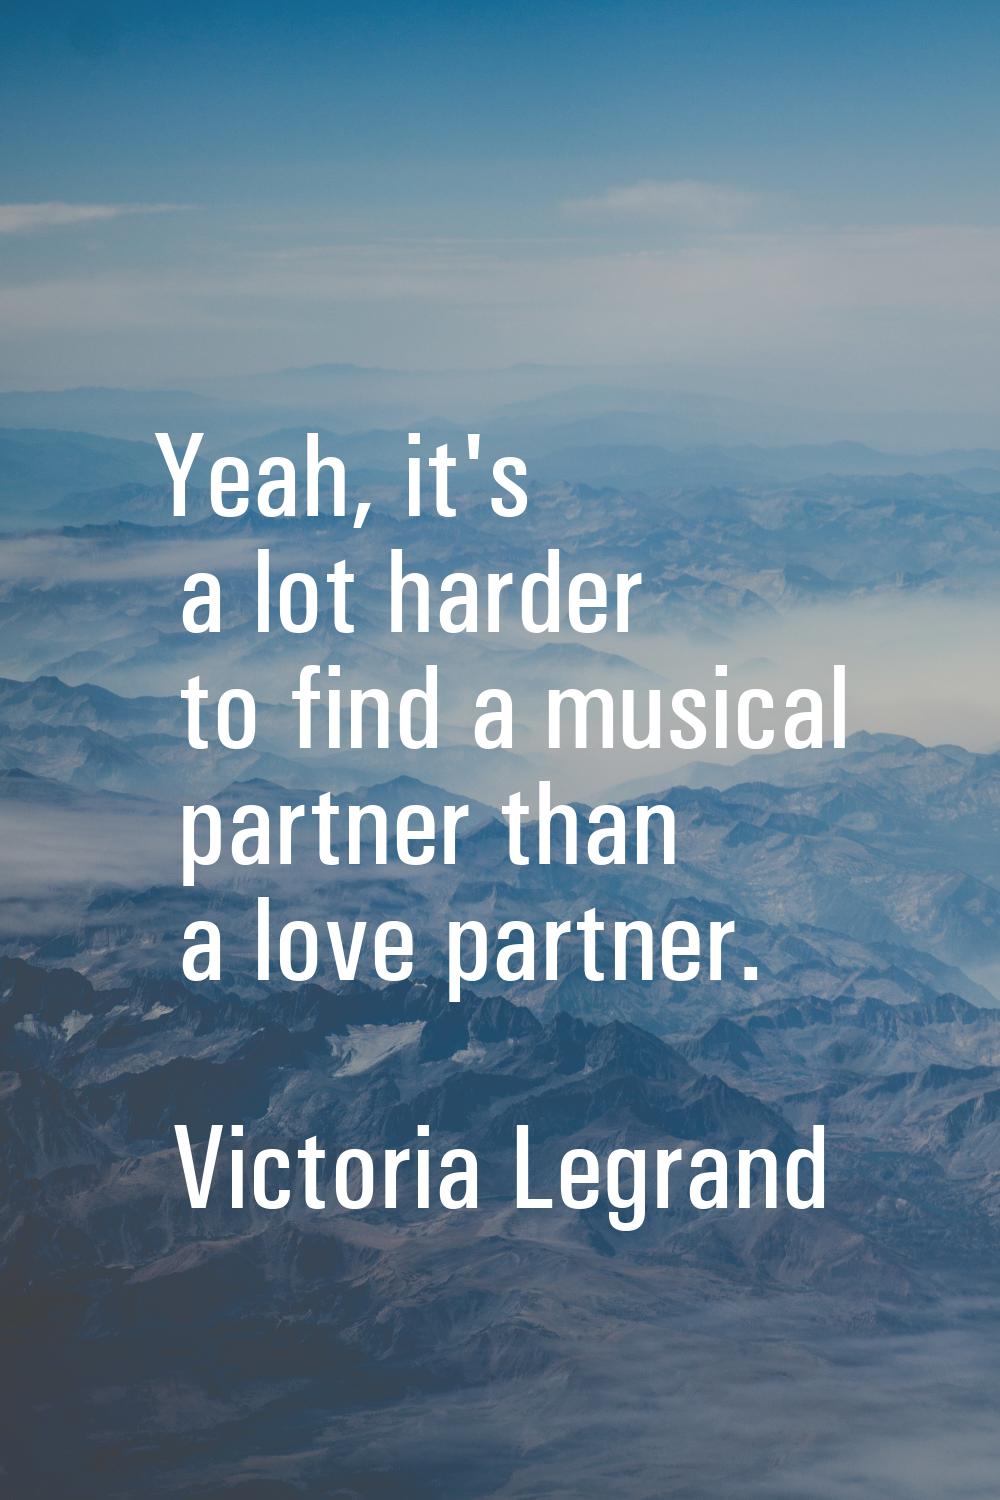 Yeah, it's a lot harder to find a musical partner than a love partner.